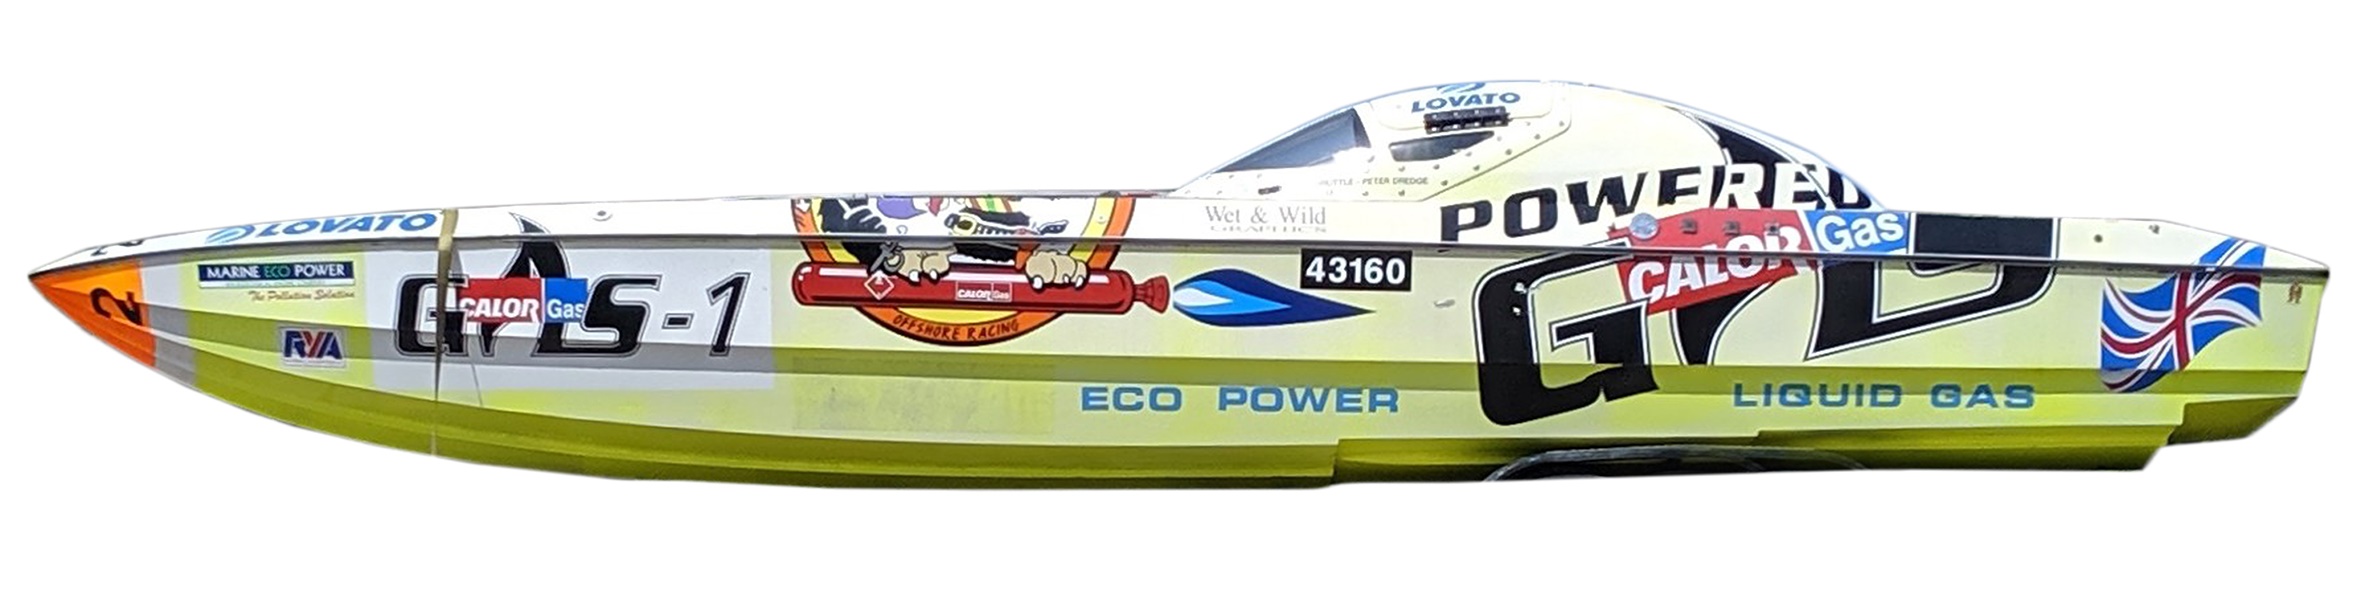 A Skater 28ft ‘Cultured Vulture’ powerboat